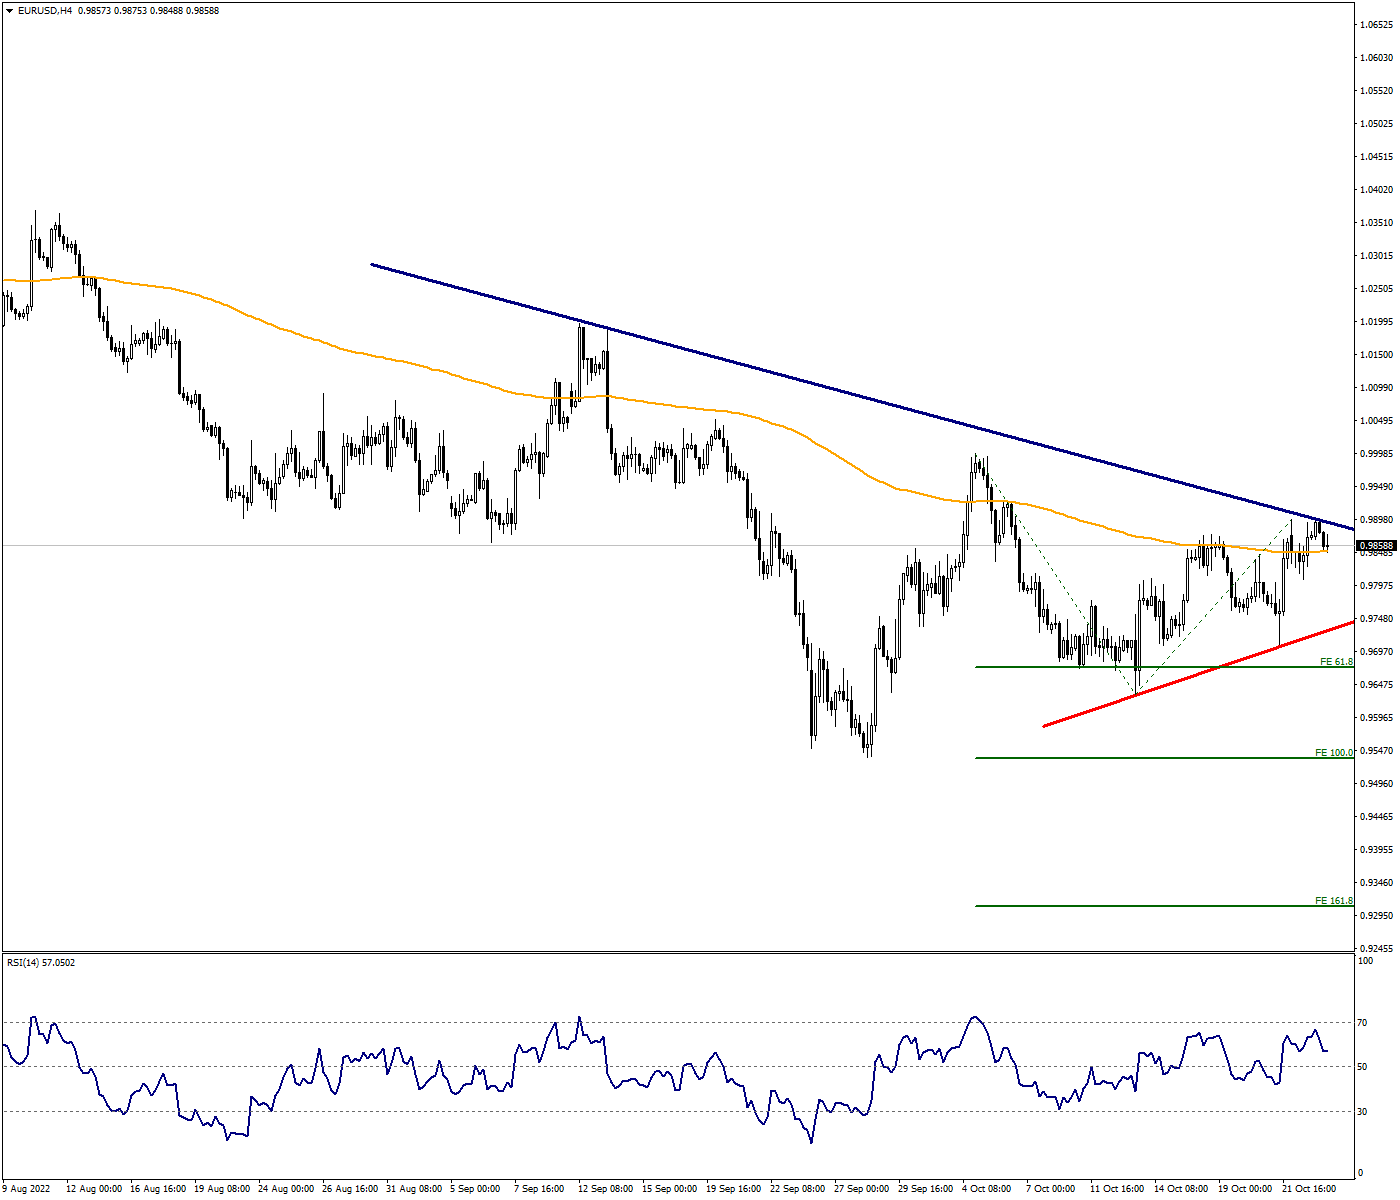 0.9900 Can Be Determinant for Permanent Recovery of EURUSD